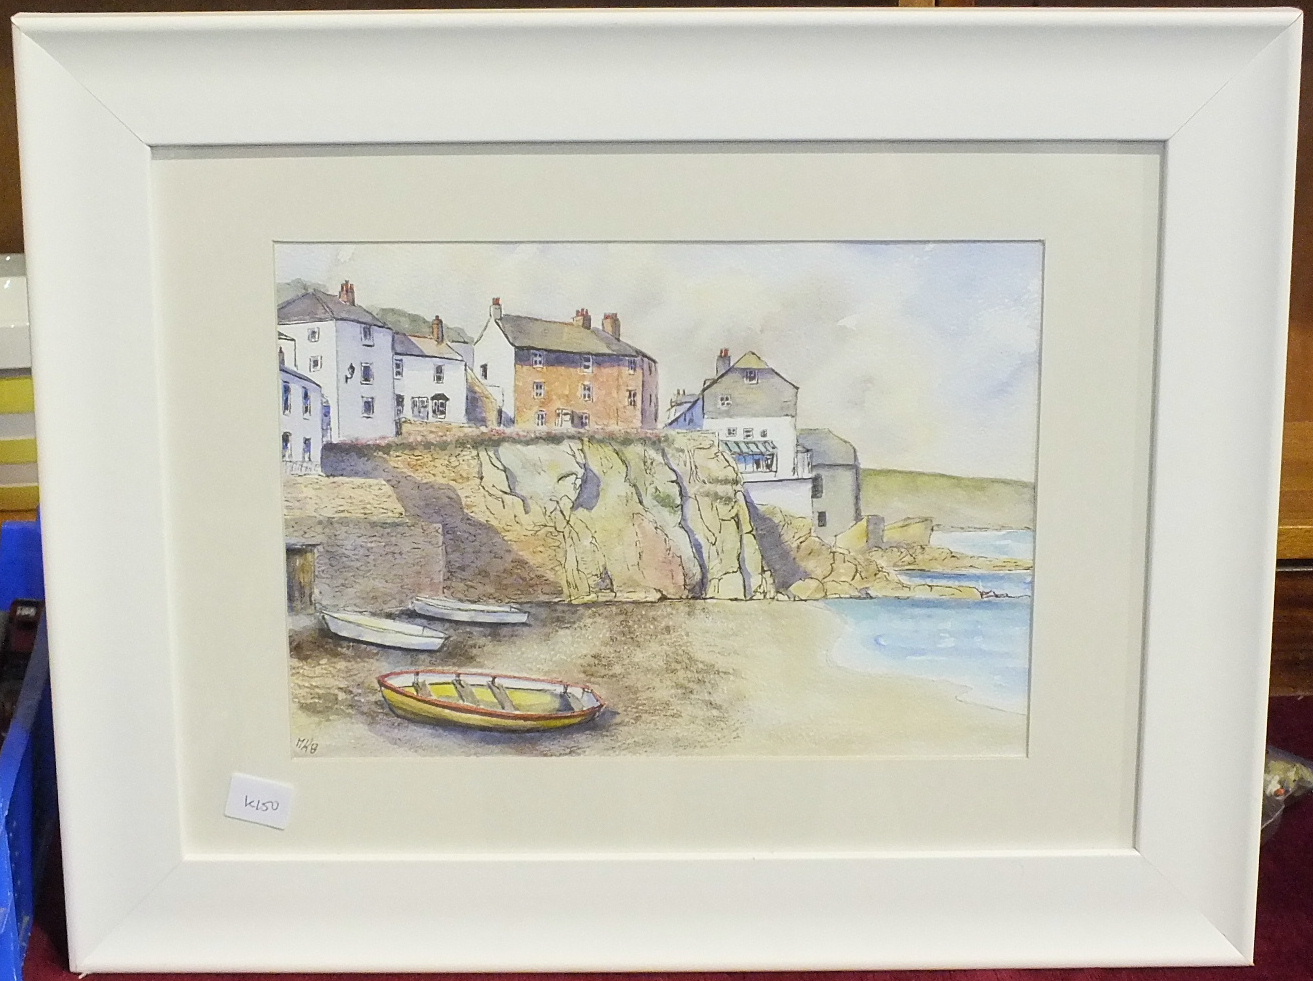 M K Godolphin, 'Kingsand Beach', watercolour and pen, 22 x 30cm, a similar view and another, ' - Image 3 of 3